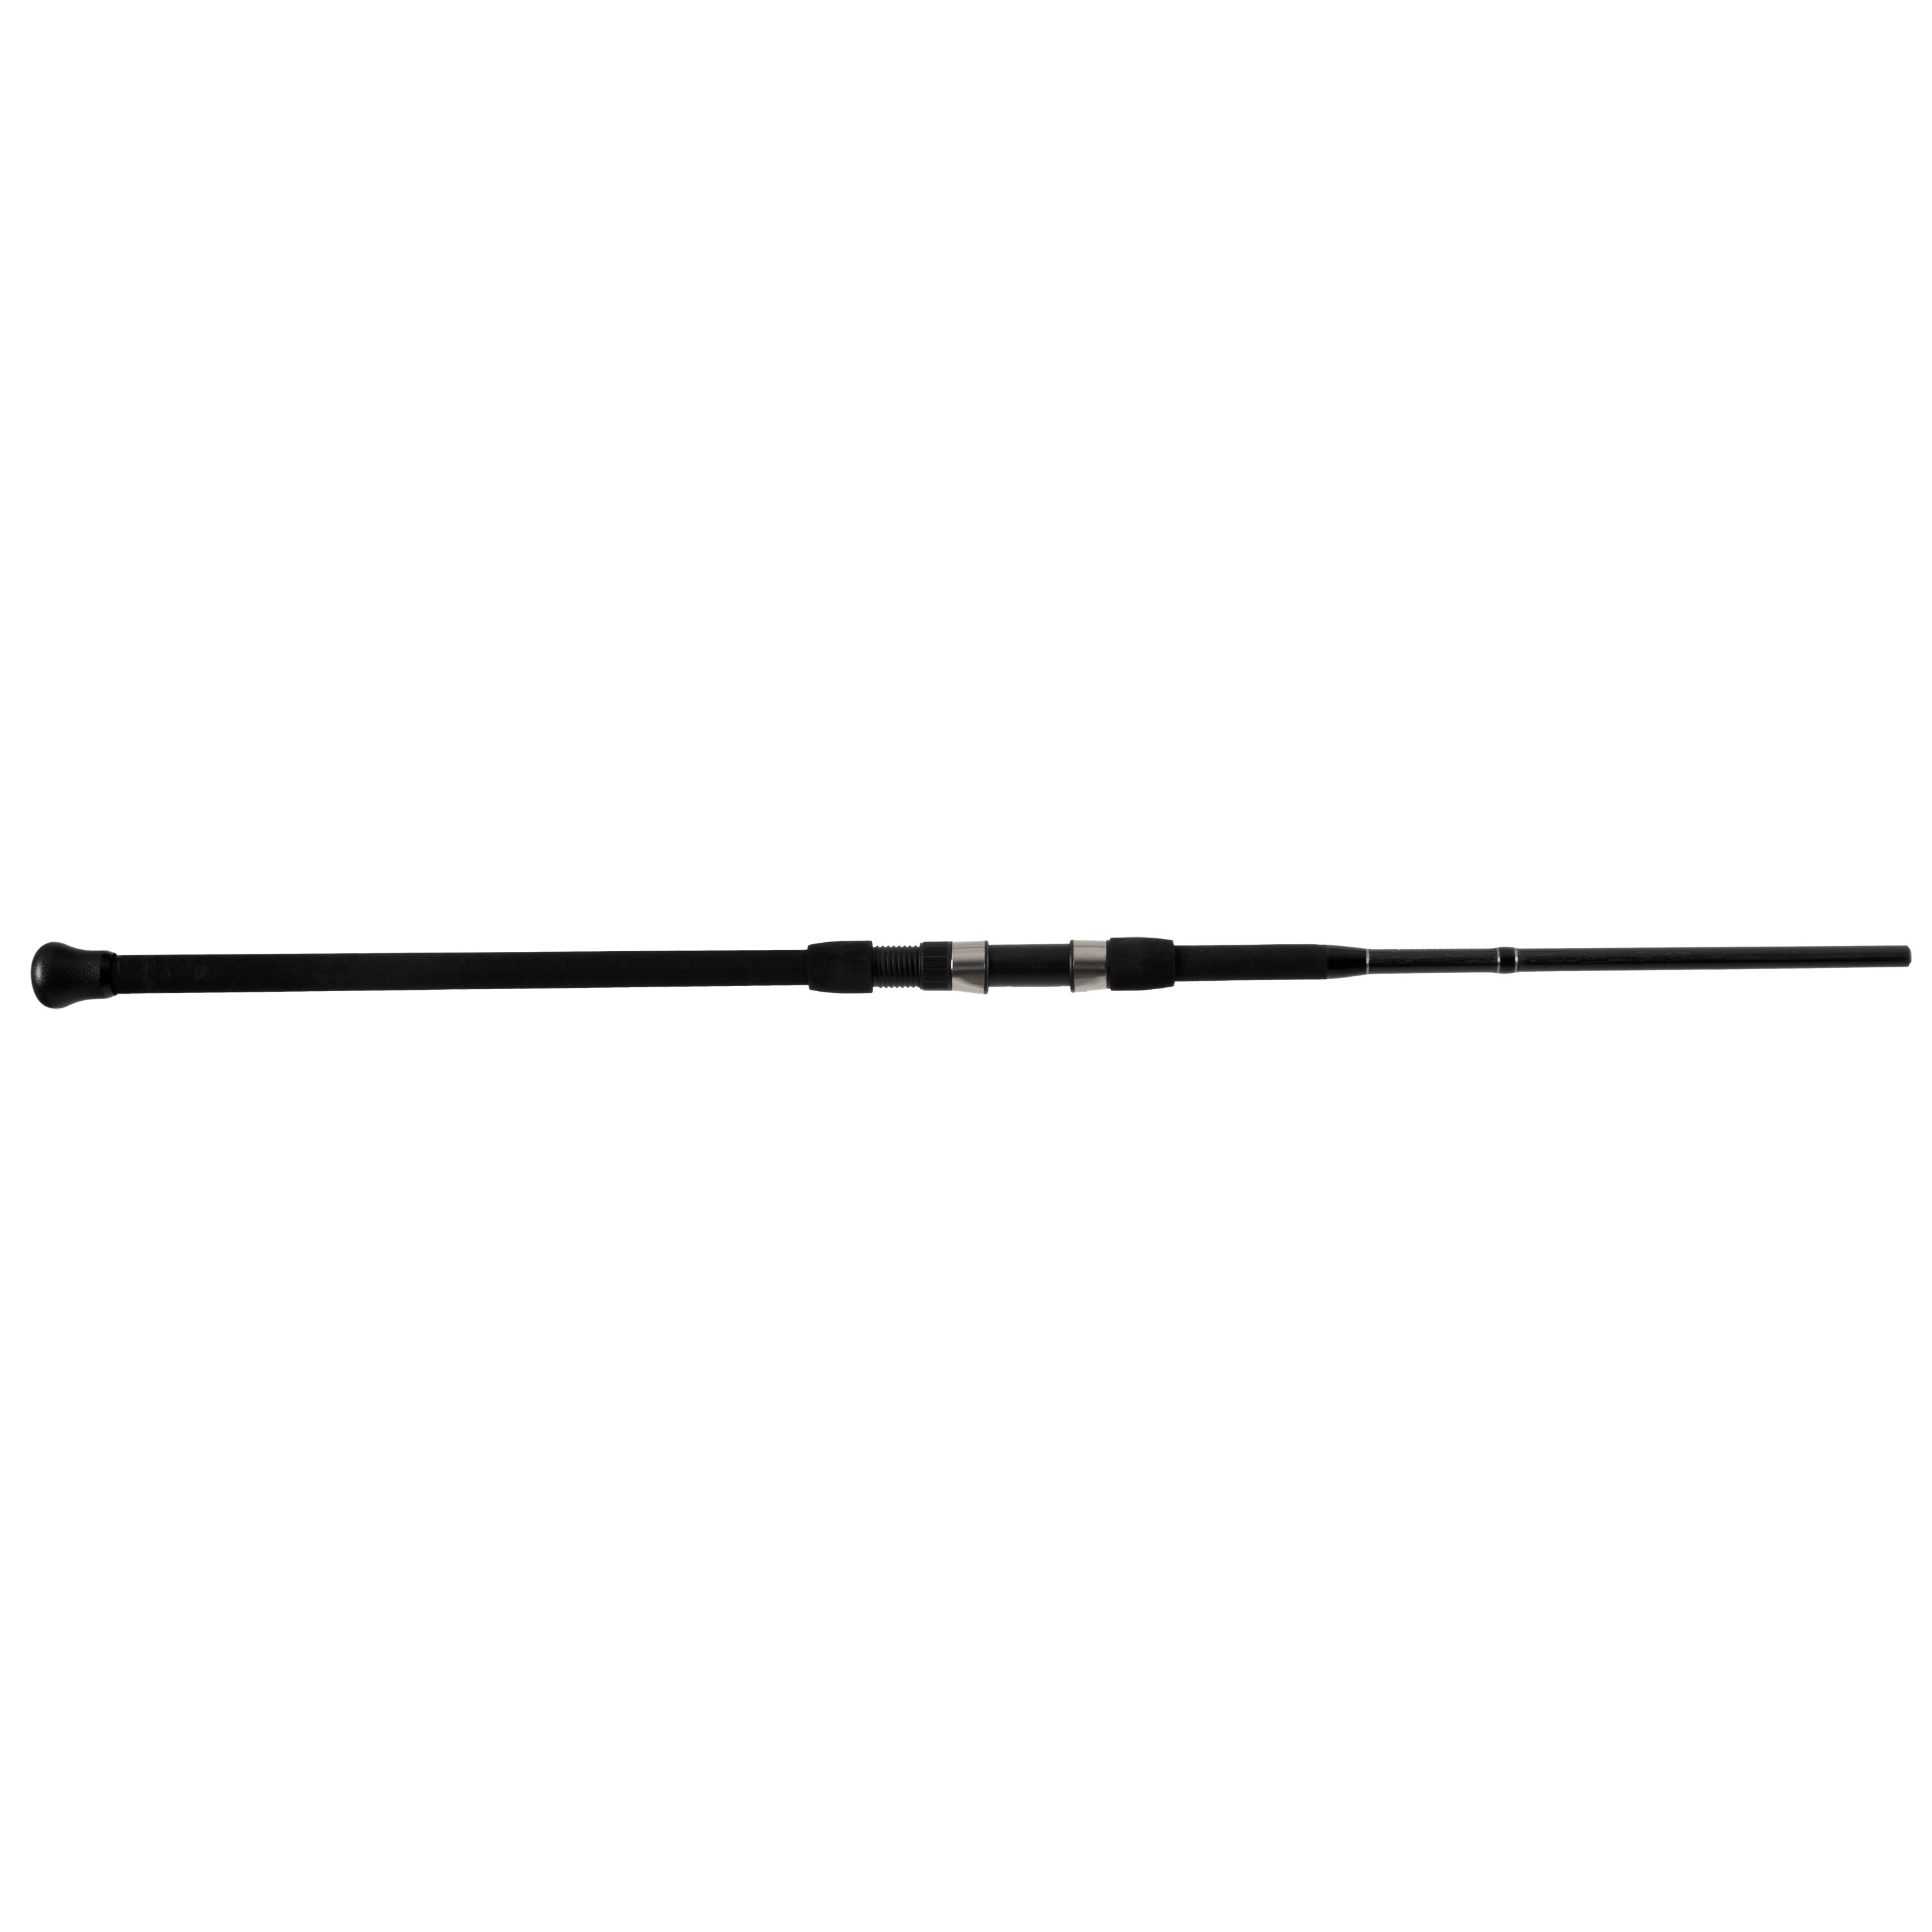 Tsunami Rigged N' Ready Spinning Rod and Reel Combo Kit